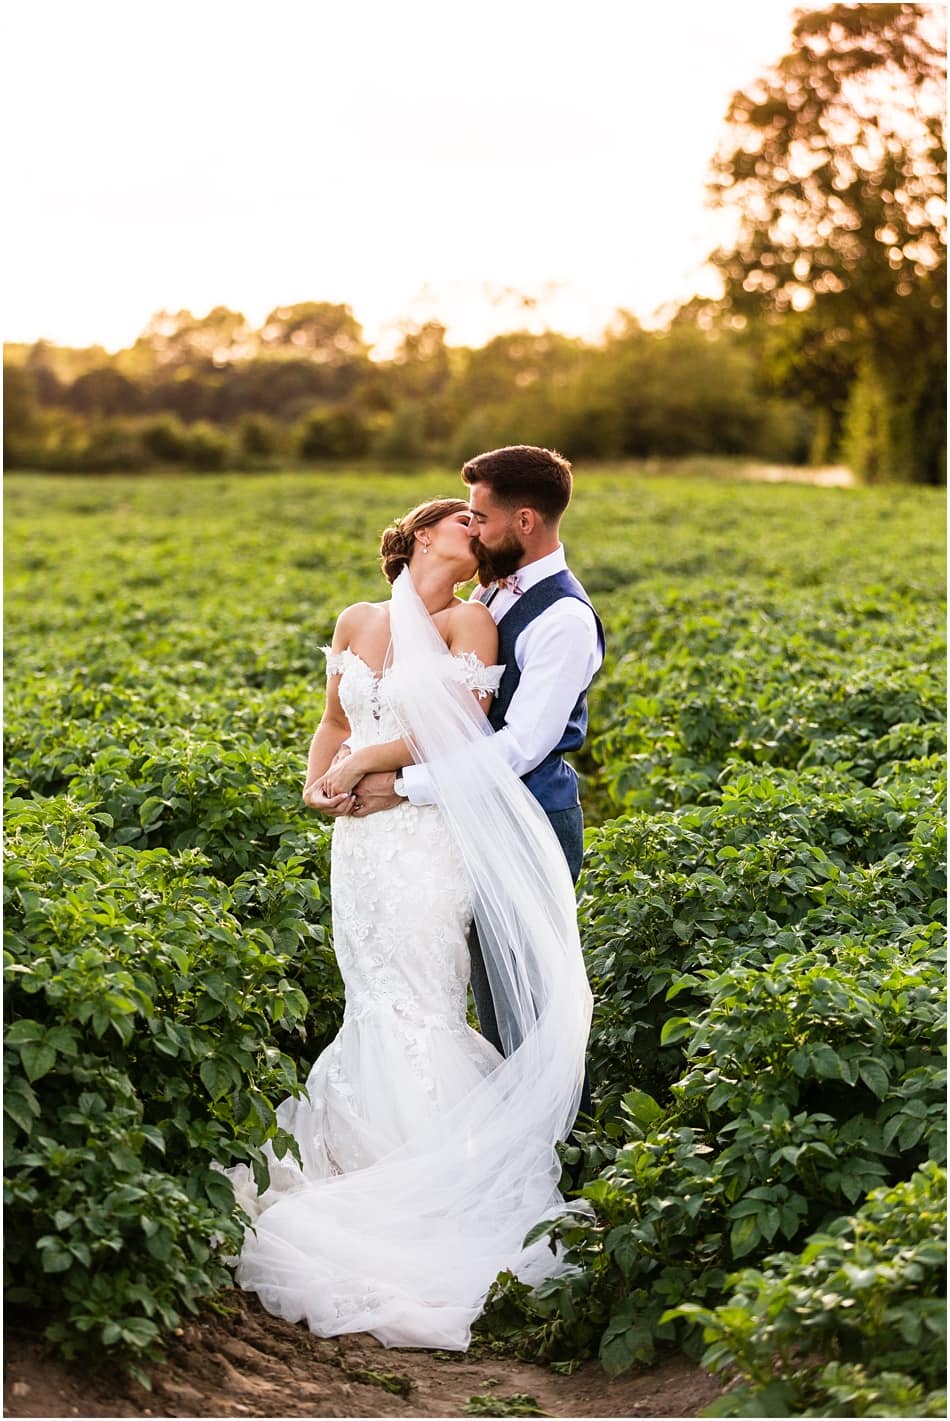 Shsutoke Barn wedding photography; Bride and Groom at sunset in the fields